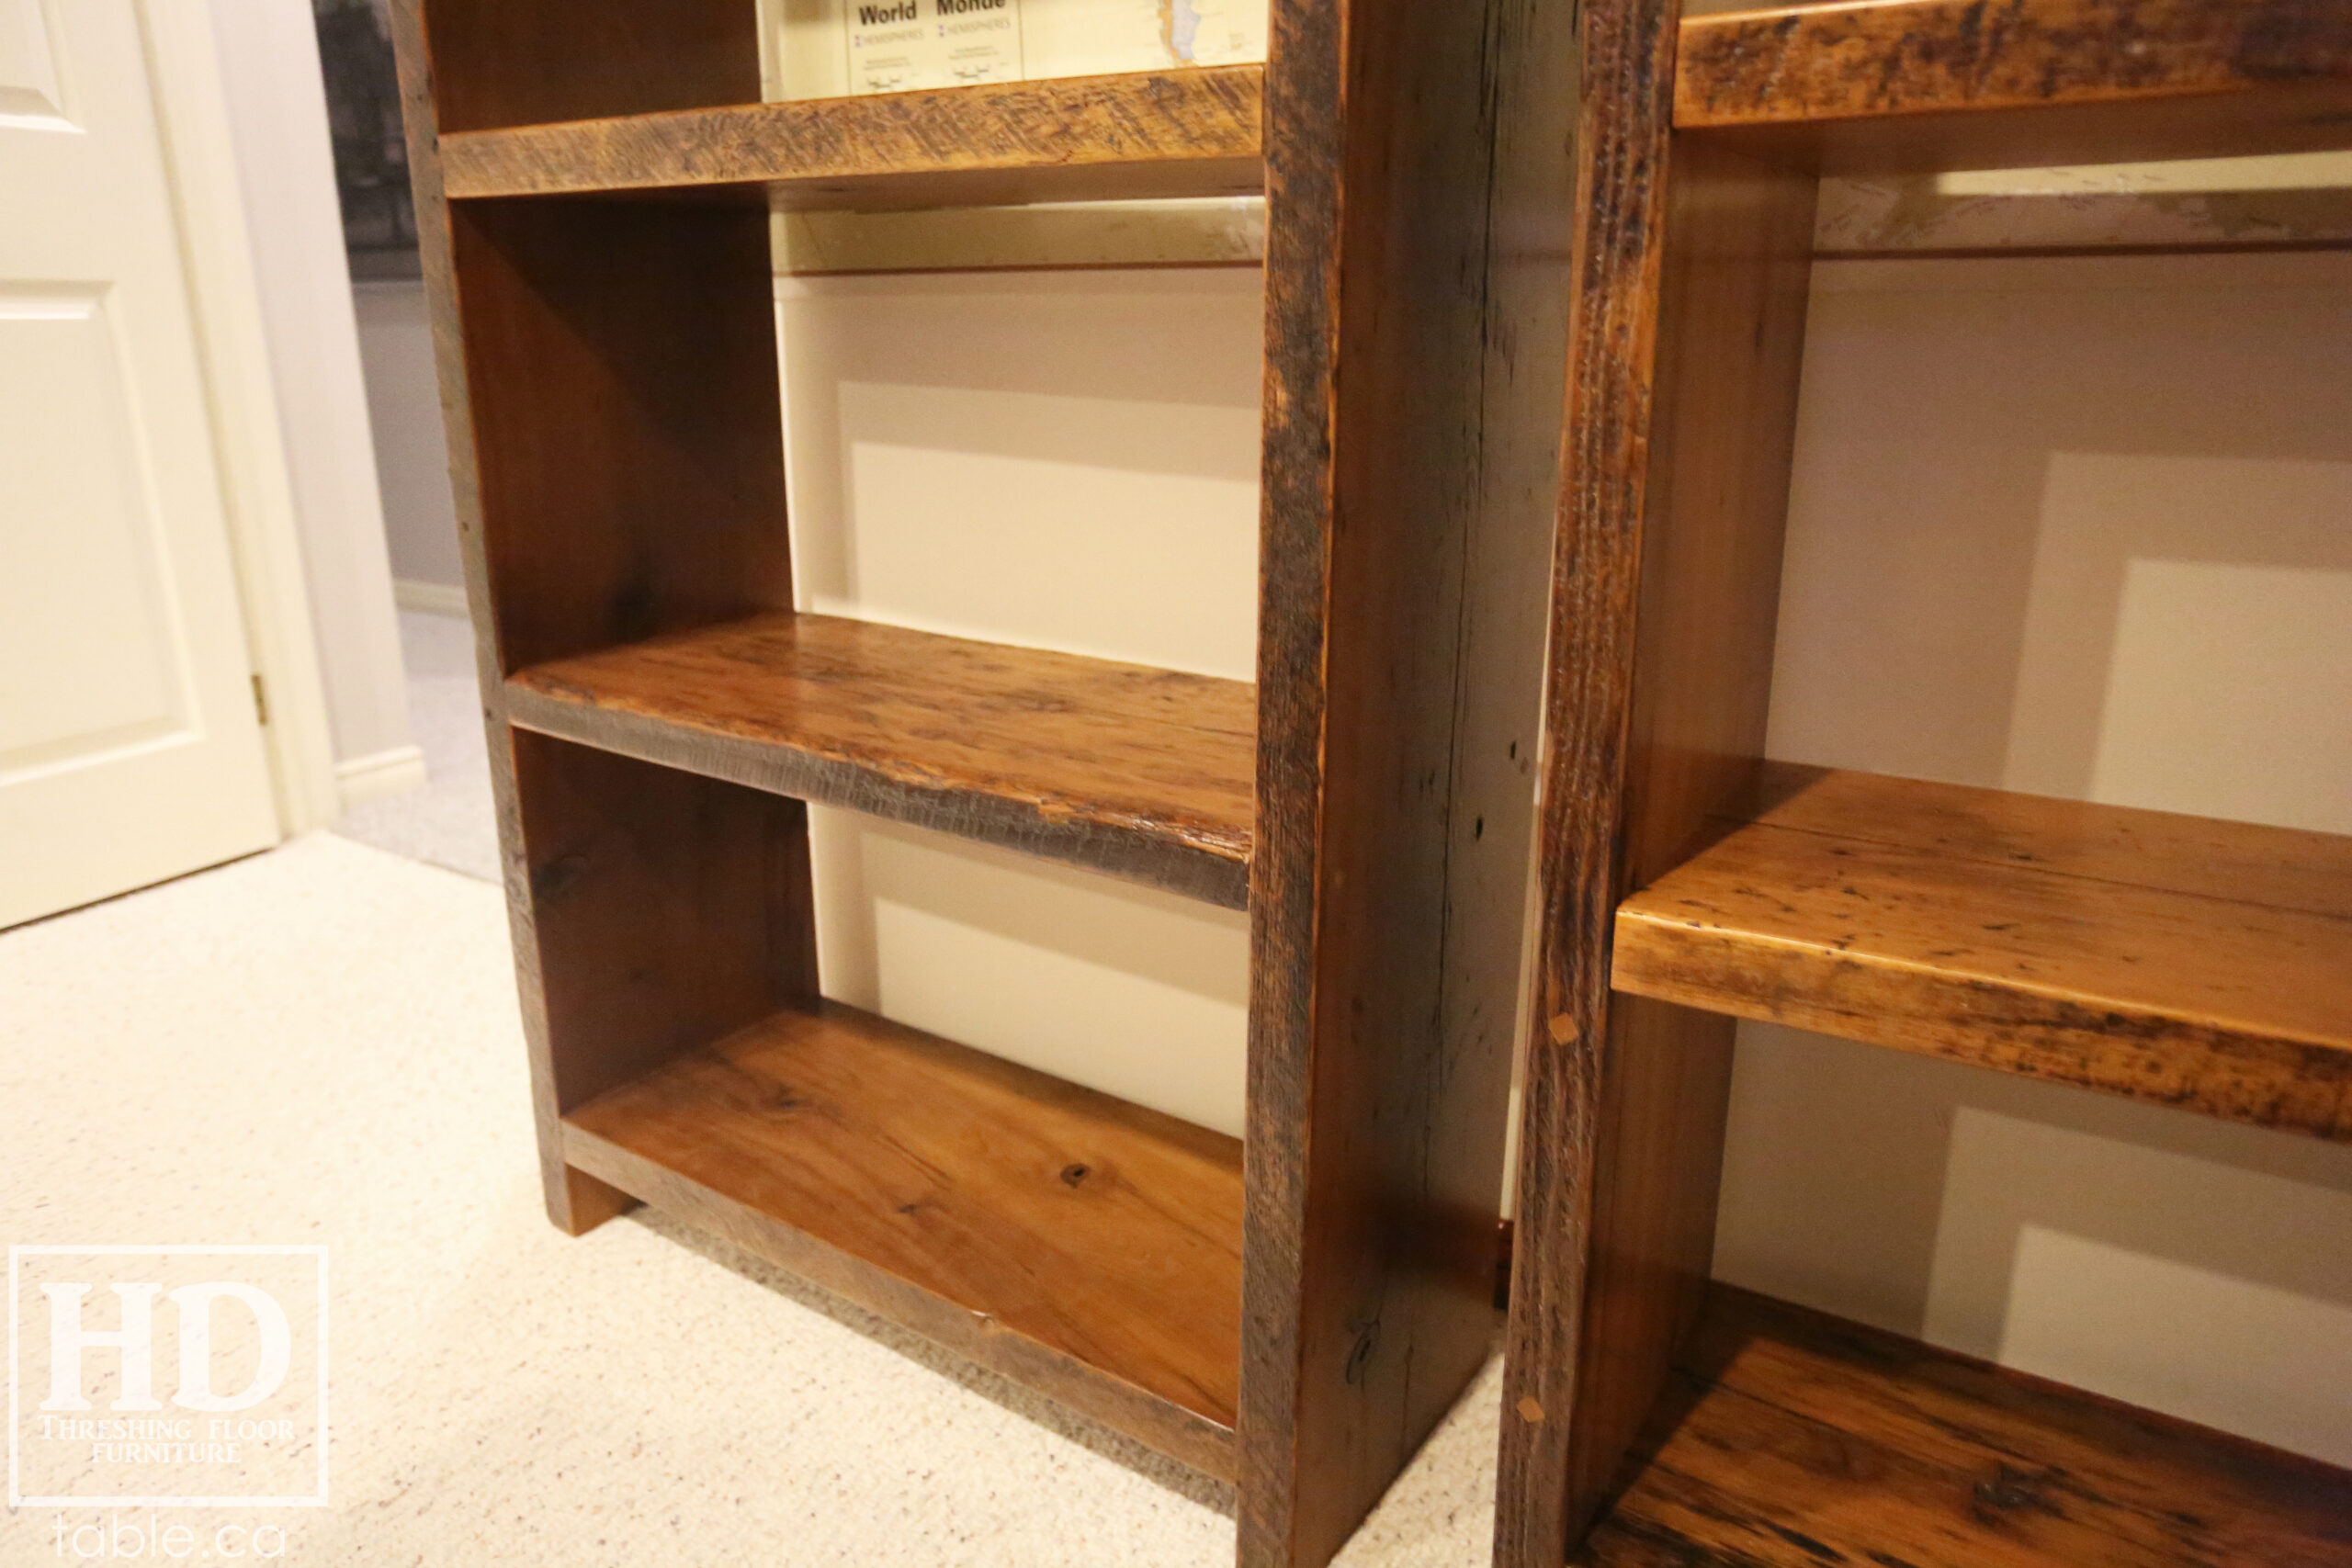 Custom Ontario Barnwood Shelving Units we made for a Thornhill, Ontario home – 2” Hemlock Threshing Floor Construction – Original edges & distressing maintained – Polyurethane clearcoat finish – www.table.ca